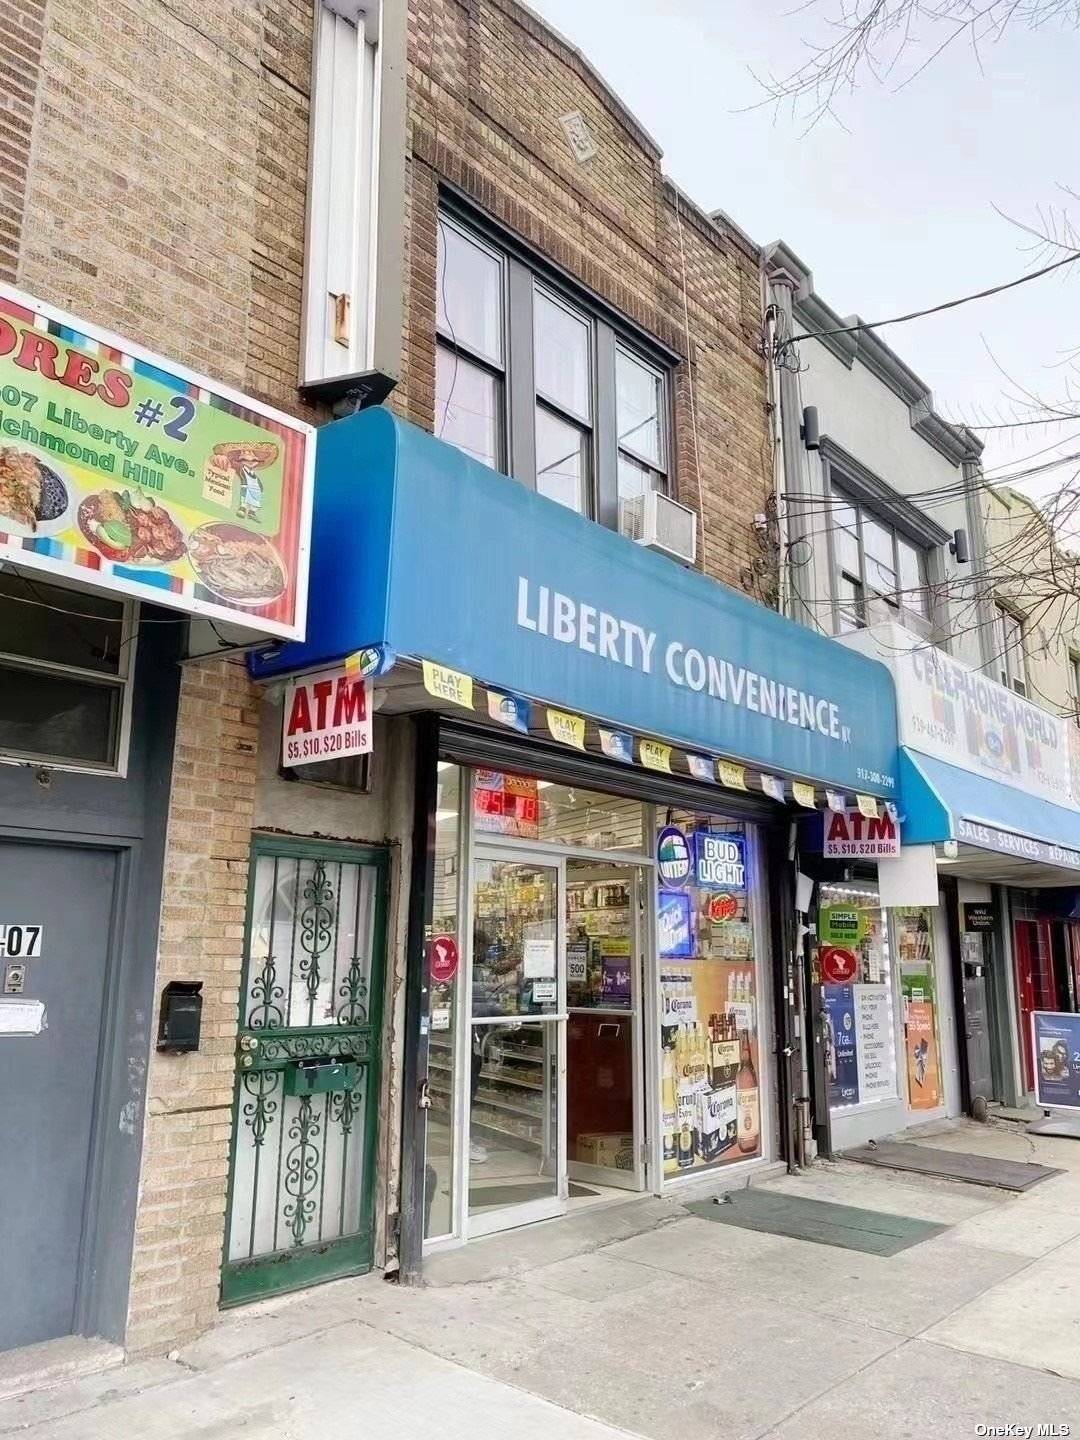 Richmond Hill Two Story Mixed Use Building With Store On Ground Floor And A Newly Renovated 3 Bedroom 2 Bathroom Apartment On the Second Floor.